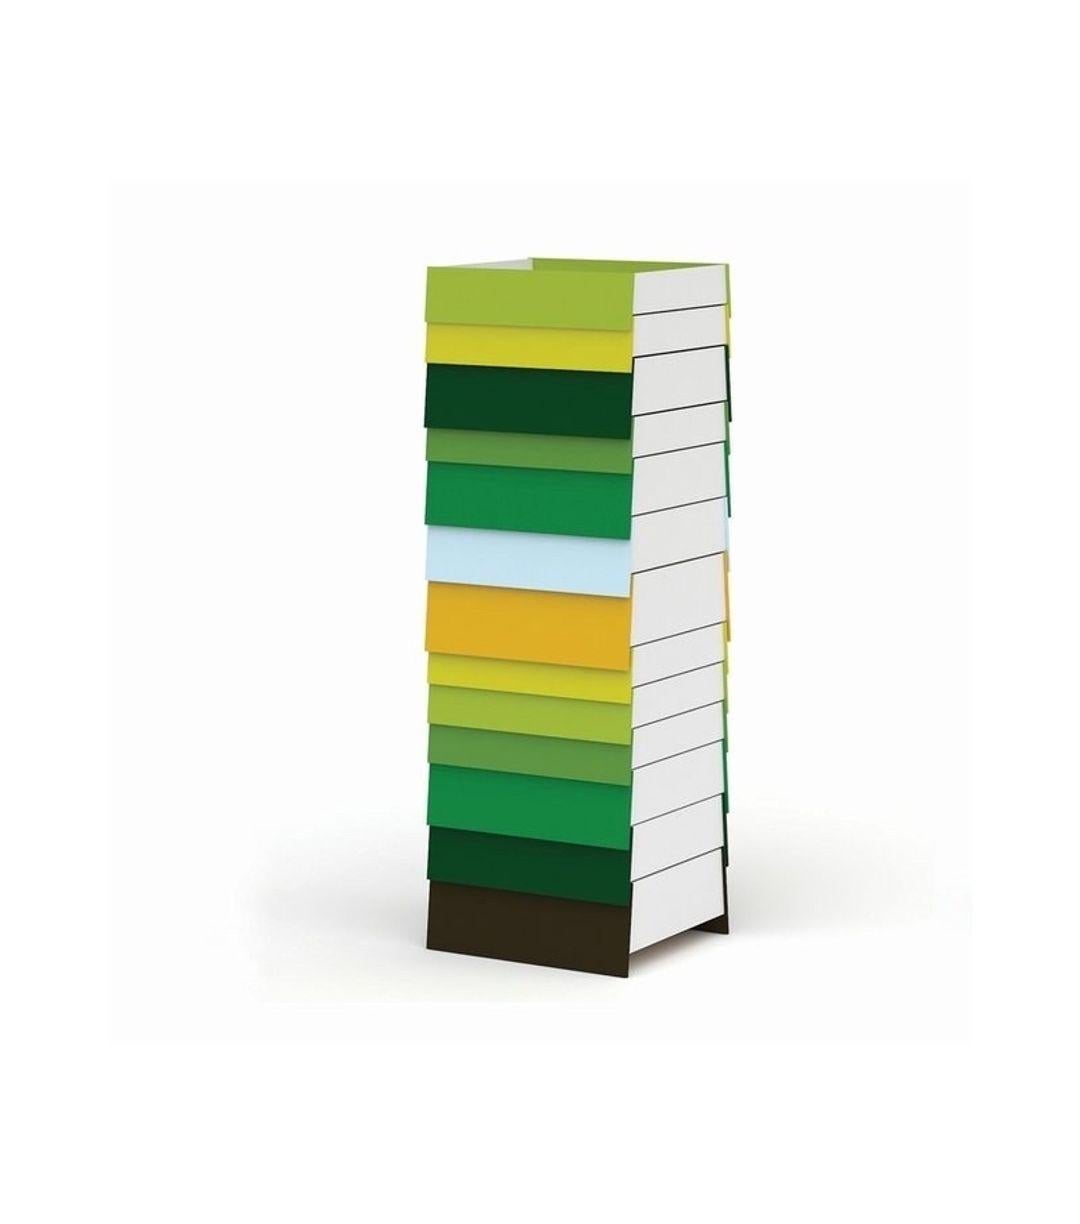 Challenging the conventions of a traditional drawer unit, Stack consists of individual, multicoloured drawers that appear suspended above one another and open in both directions, creating an irregular composition.

n this innovative design Shay